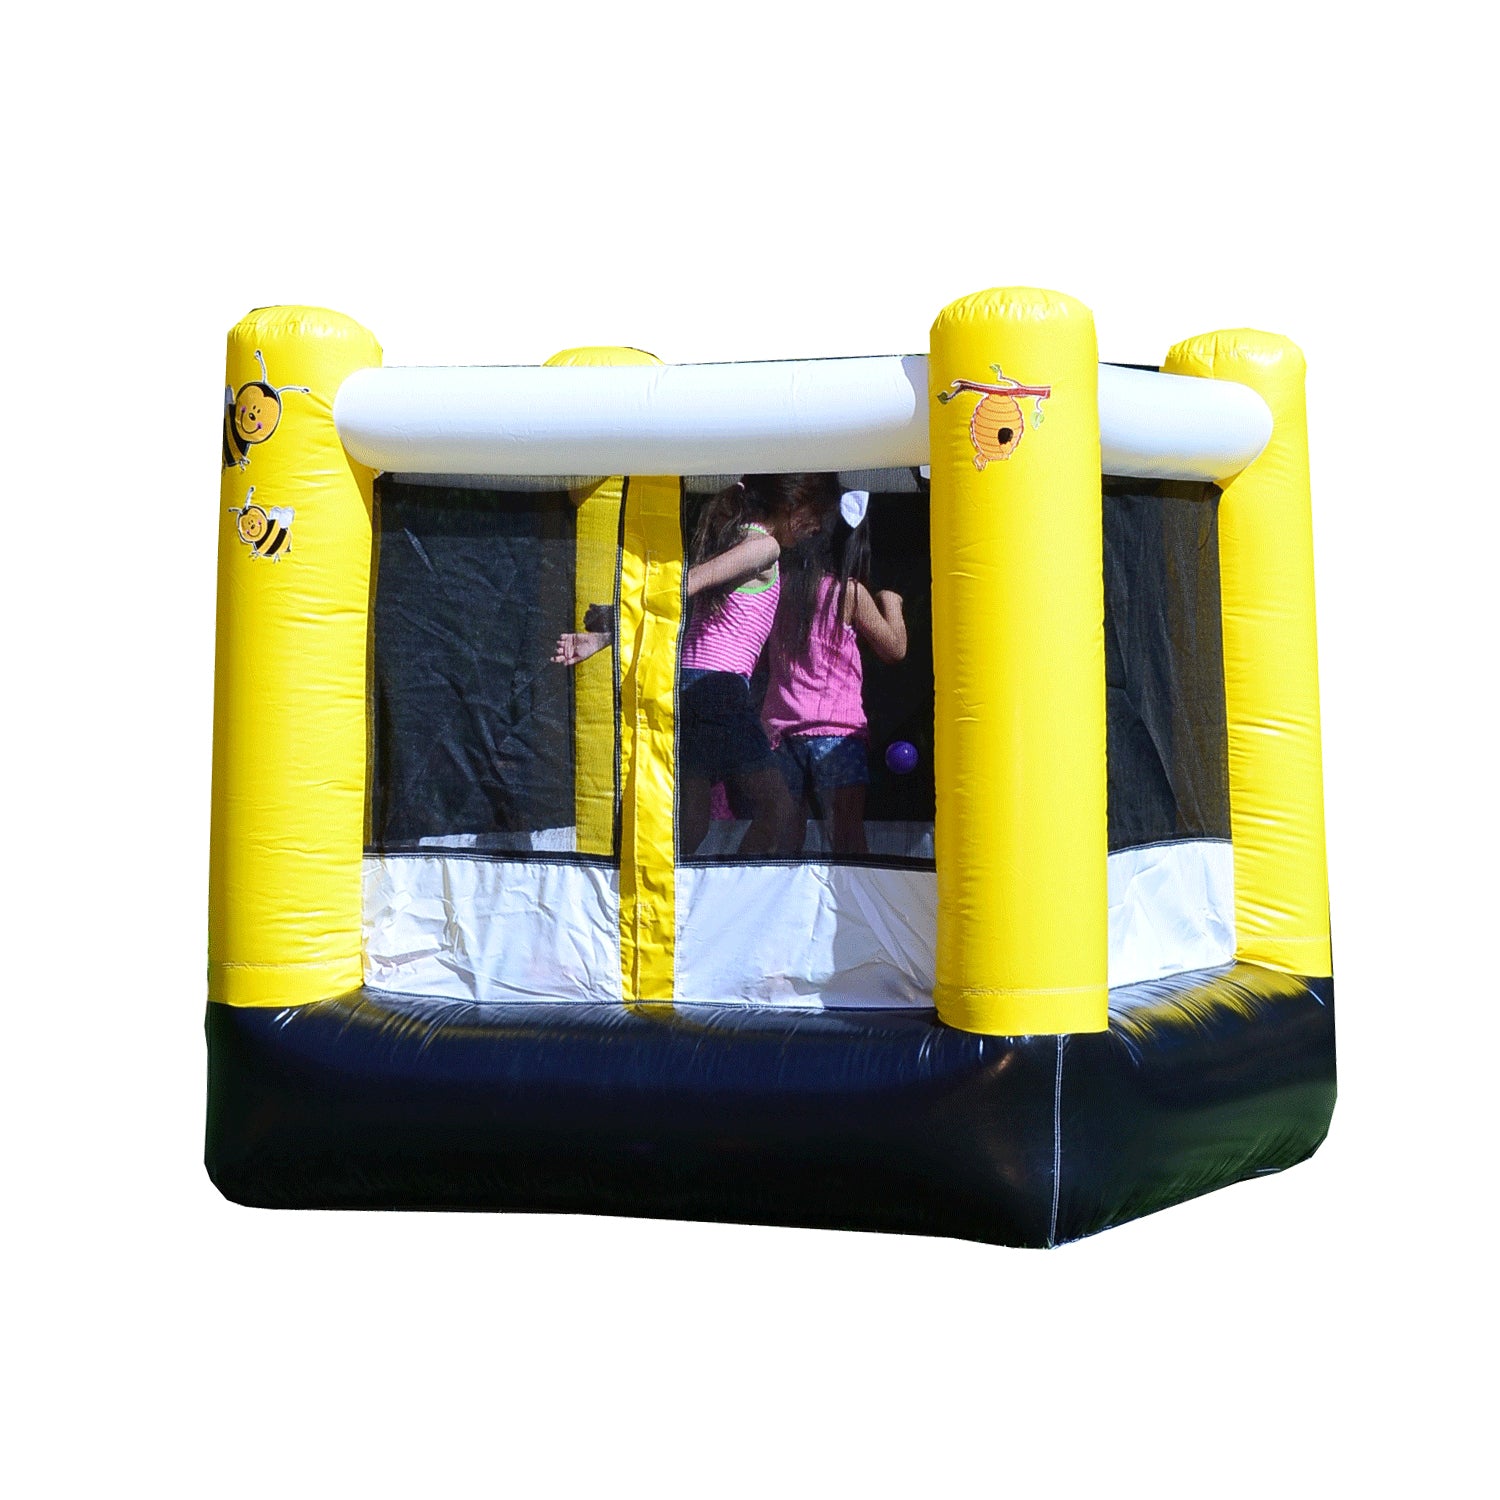 direct price for rental grade caterpillar bounce house inflatable water slide with pool green and yellow